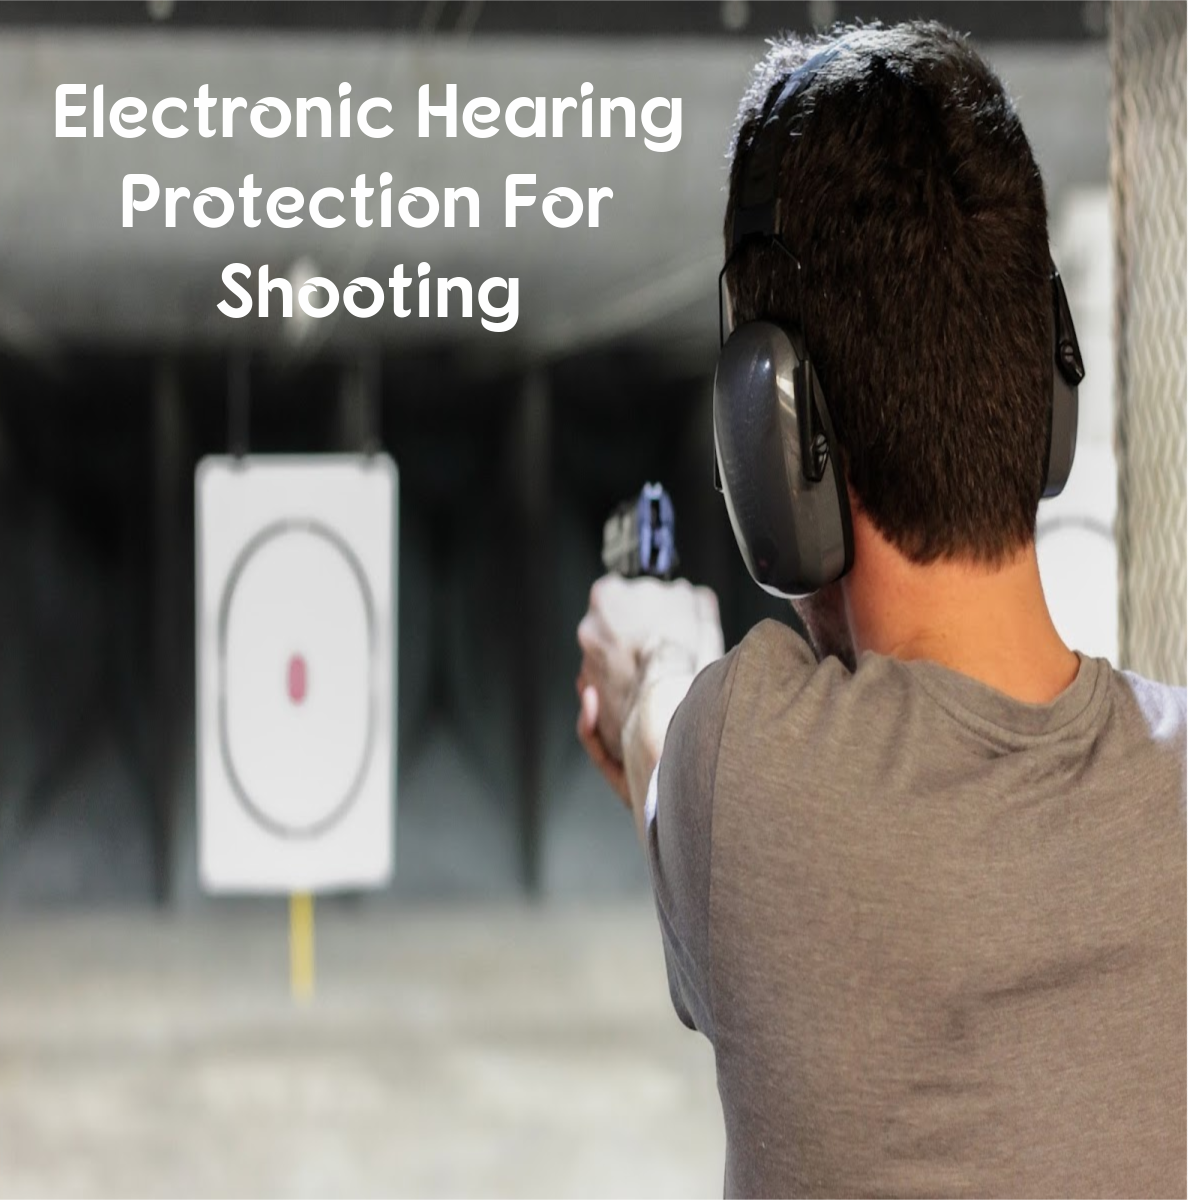 Best In-Ear Electronic Hearing Protection For Shooting Though hearing security is frequently neglected when shooting, it has grown vital to use hearing protection so as to stop potential hearing loss. Hearing protection was made to decrease the noise pressure level that reaches your wearer's ear as the sound gets harmful to hearing over a specific level for a particular moment. There are various kinds of hearing protection available, however, among the most well-known varieties of hearing protection and among the most successful is earplugs. An earplug may be described as a system that's supposed to be inserted into the ear canal to safeguard the consumer's ears from loud noises.